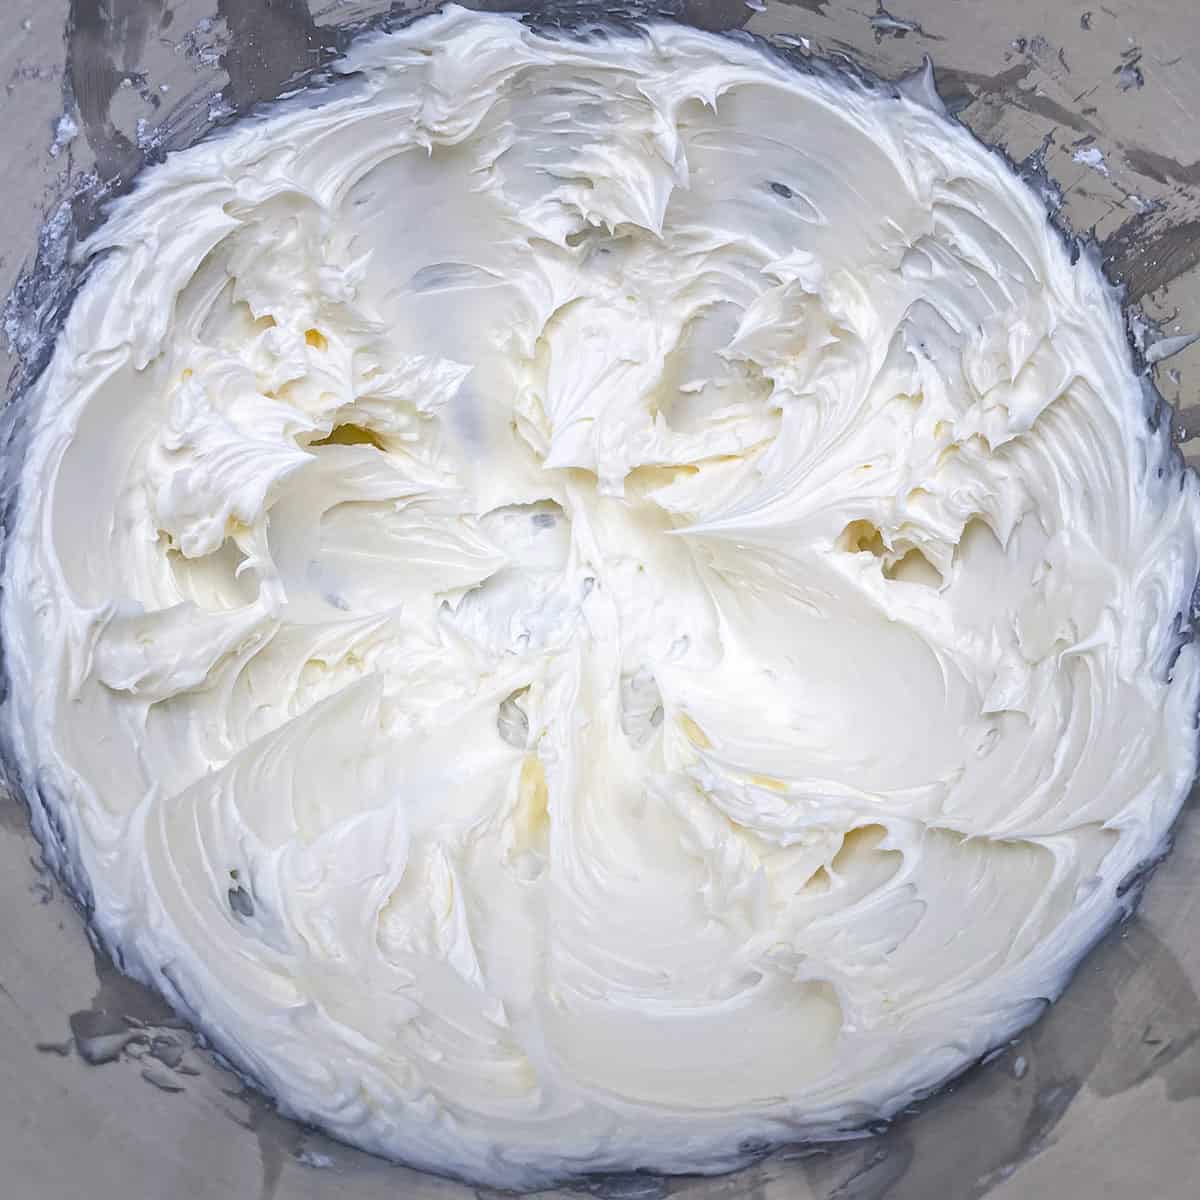 Soft peaks of creamed butter and powdered sugar after 3 minutes being mixed.